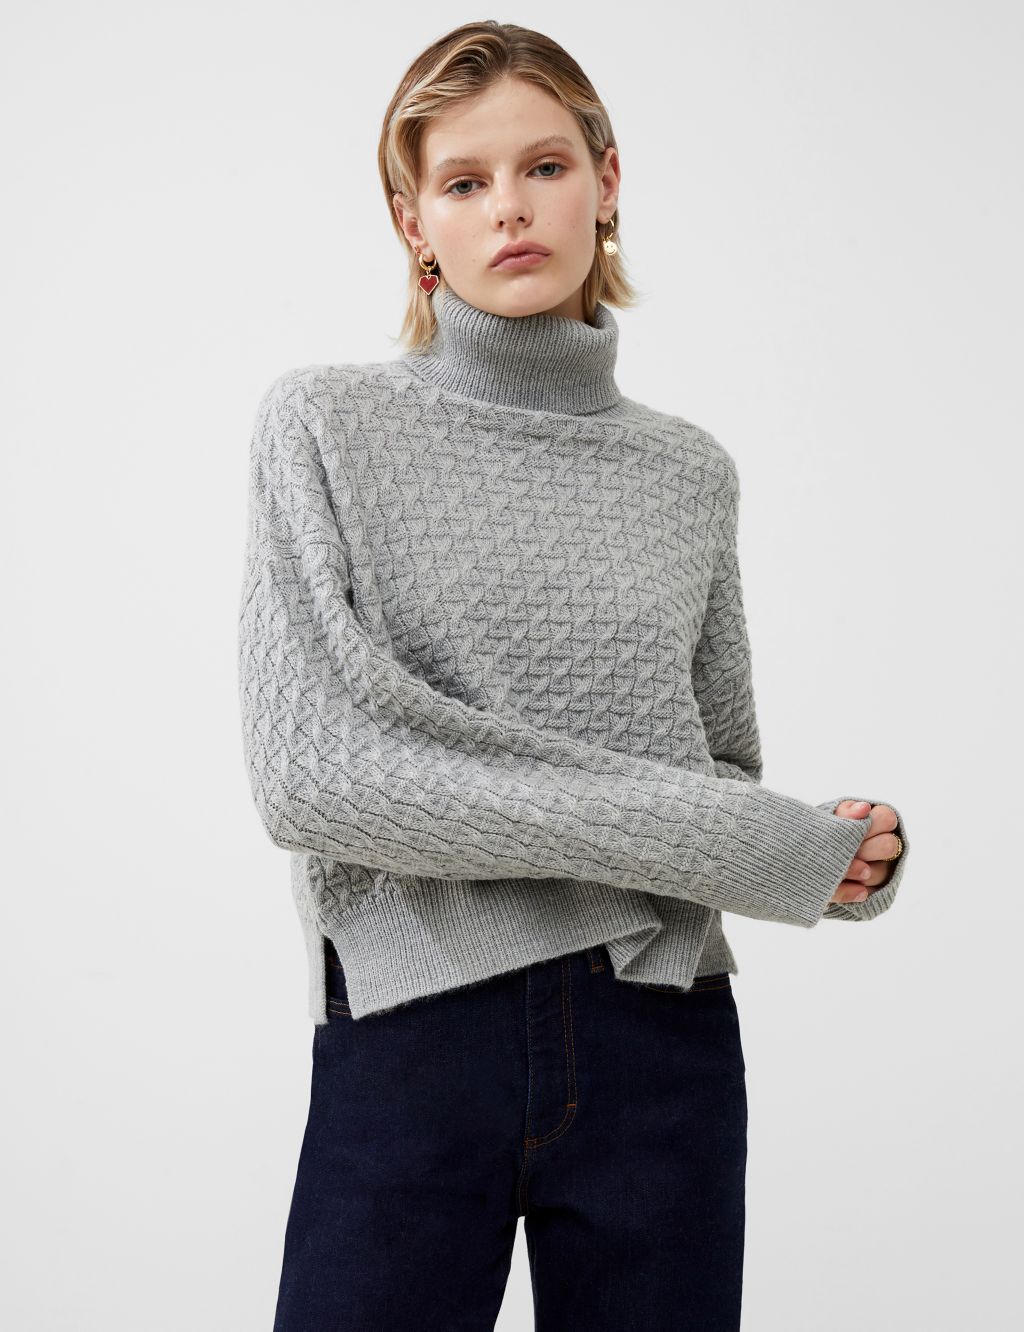 Roll Neck Jumpers  The Best Thin & Ribbed Knitwear For Ladies